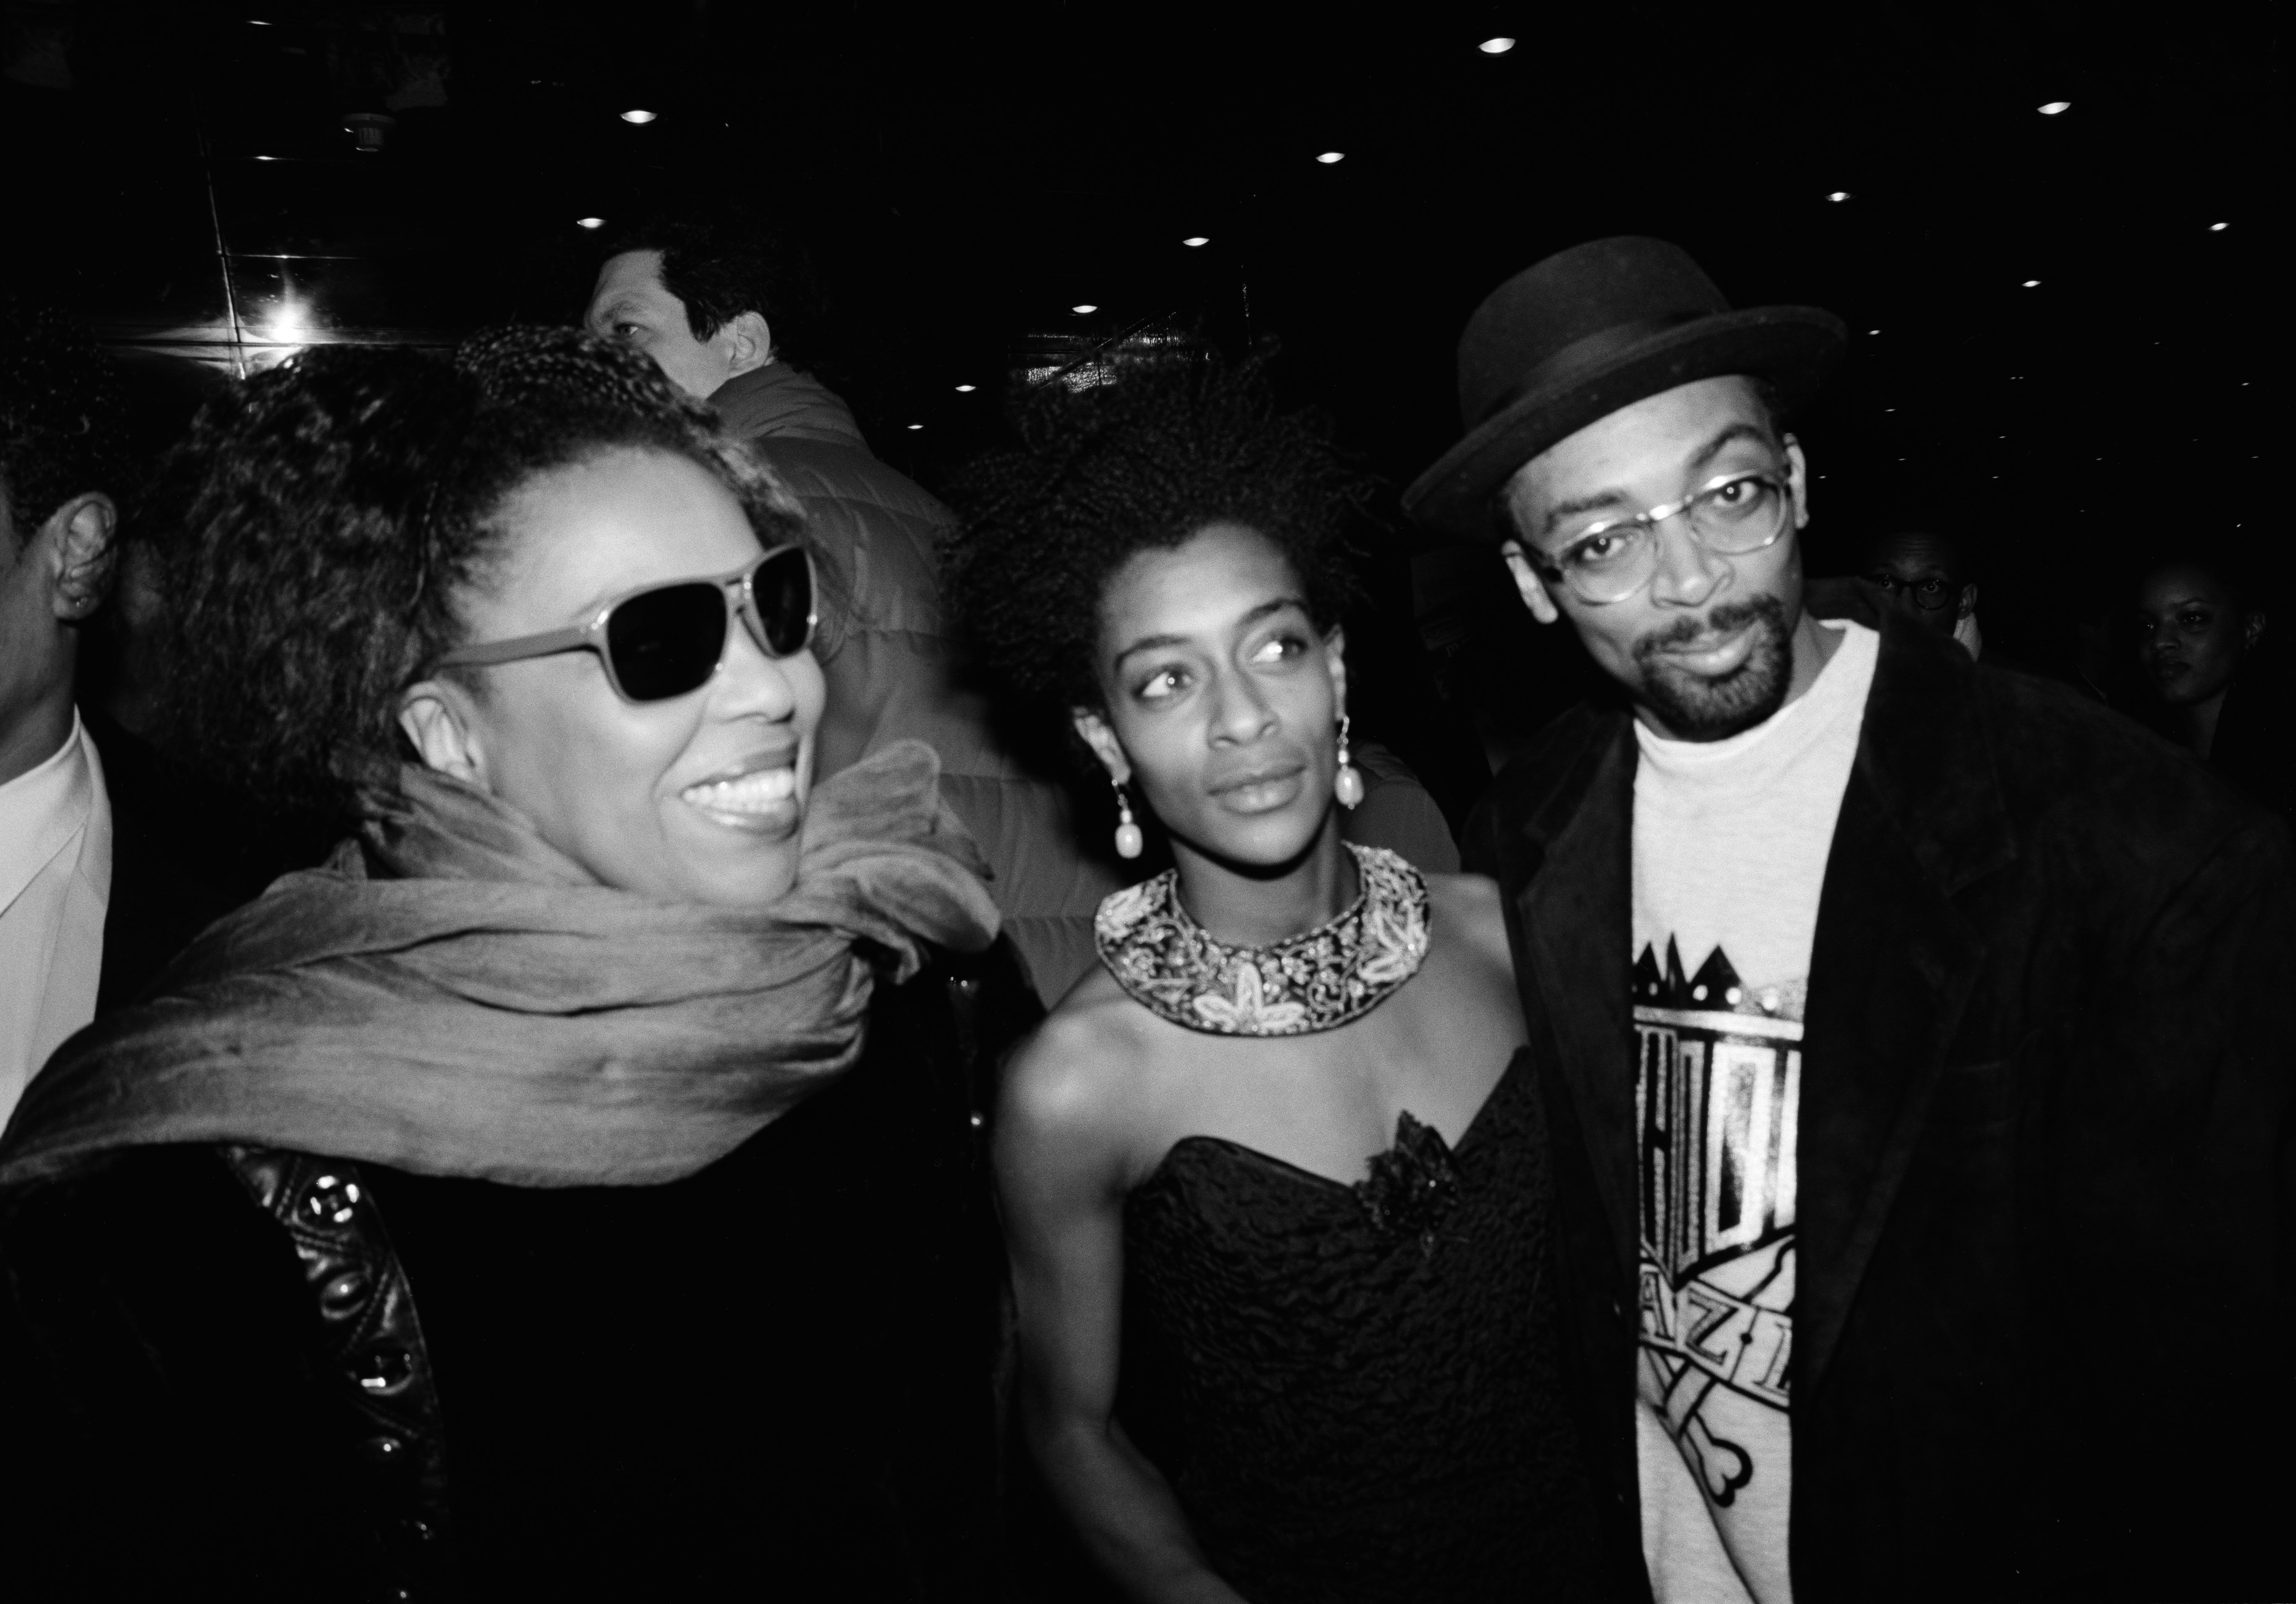 Singer Roberta Flack, actress Joie Lee, and film director Spike Lee, pose together at the Criterion Cinema during the preview of the film 'School Daze' on February 8, 1988 in New York City | Source: Getty Images